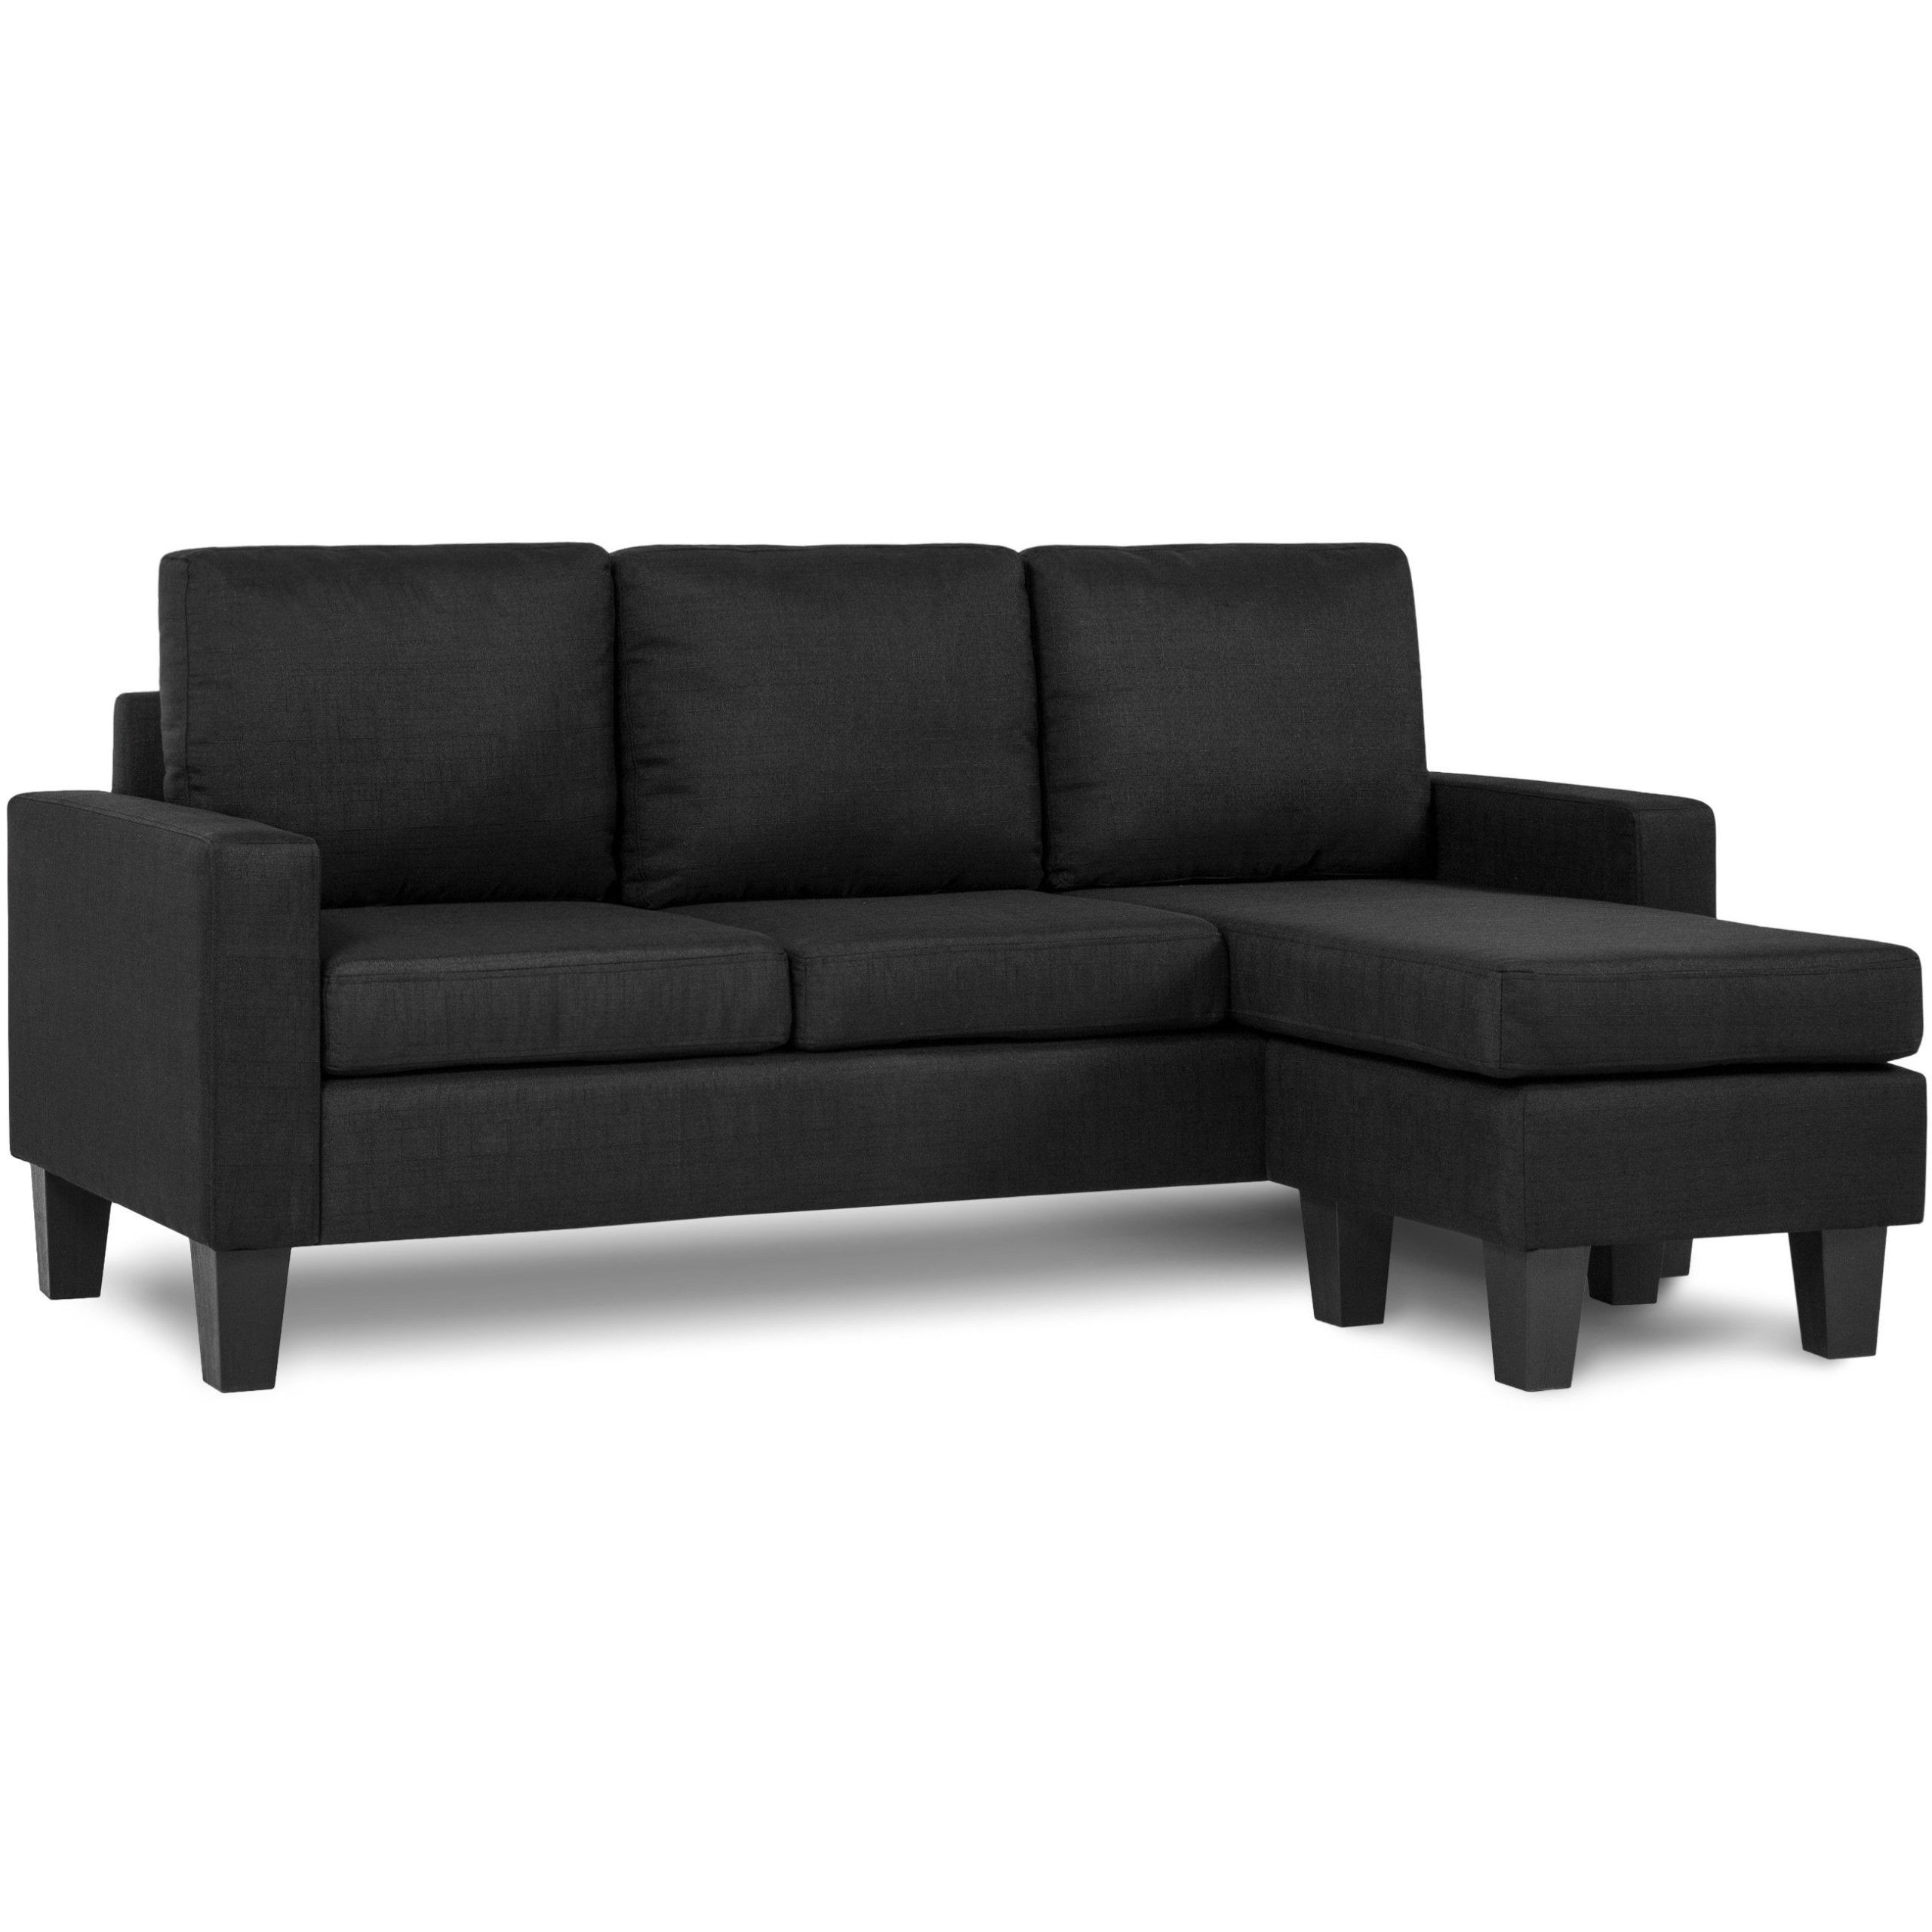 Best Choice Products Multifunctional Linen 3 Seat L Shape Sectional Intended For Well Known 3 Seat L Shaped Sofas In Black (View 12 of 15)